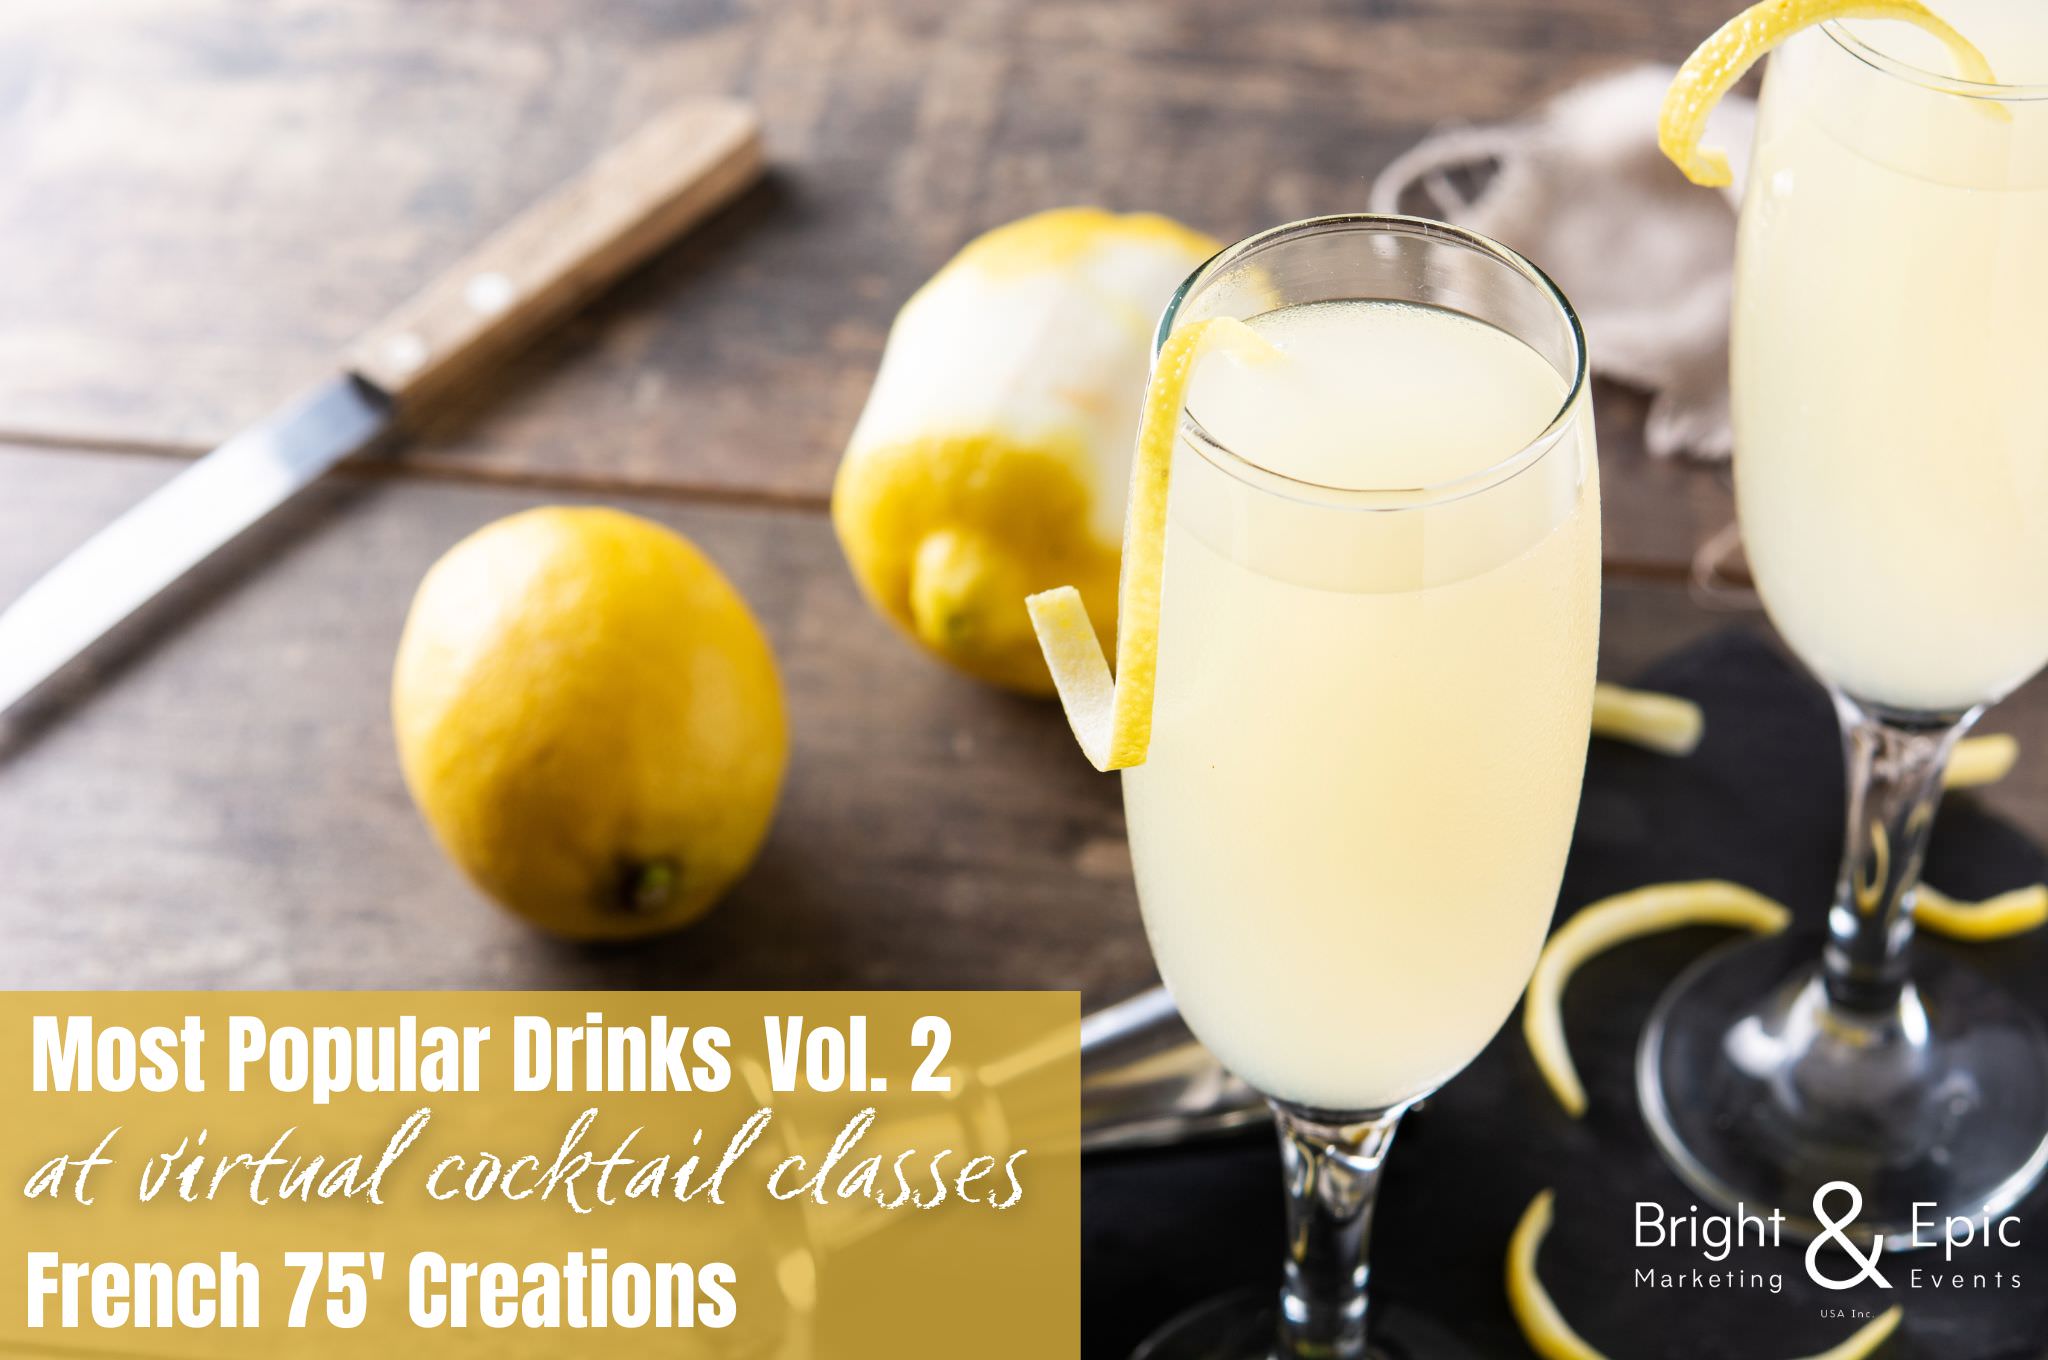 Virtual Cocktail Classes - Most popular cocktails Vol. 2- French 75 - brightandepic USA virtual Team Building Activities